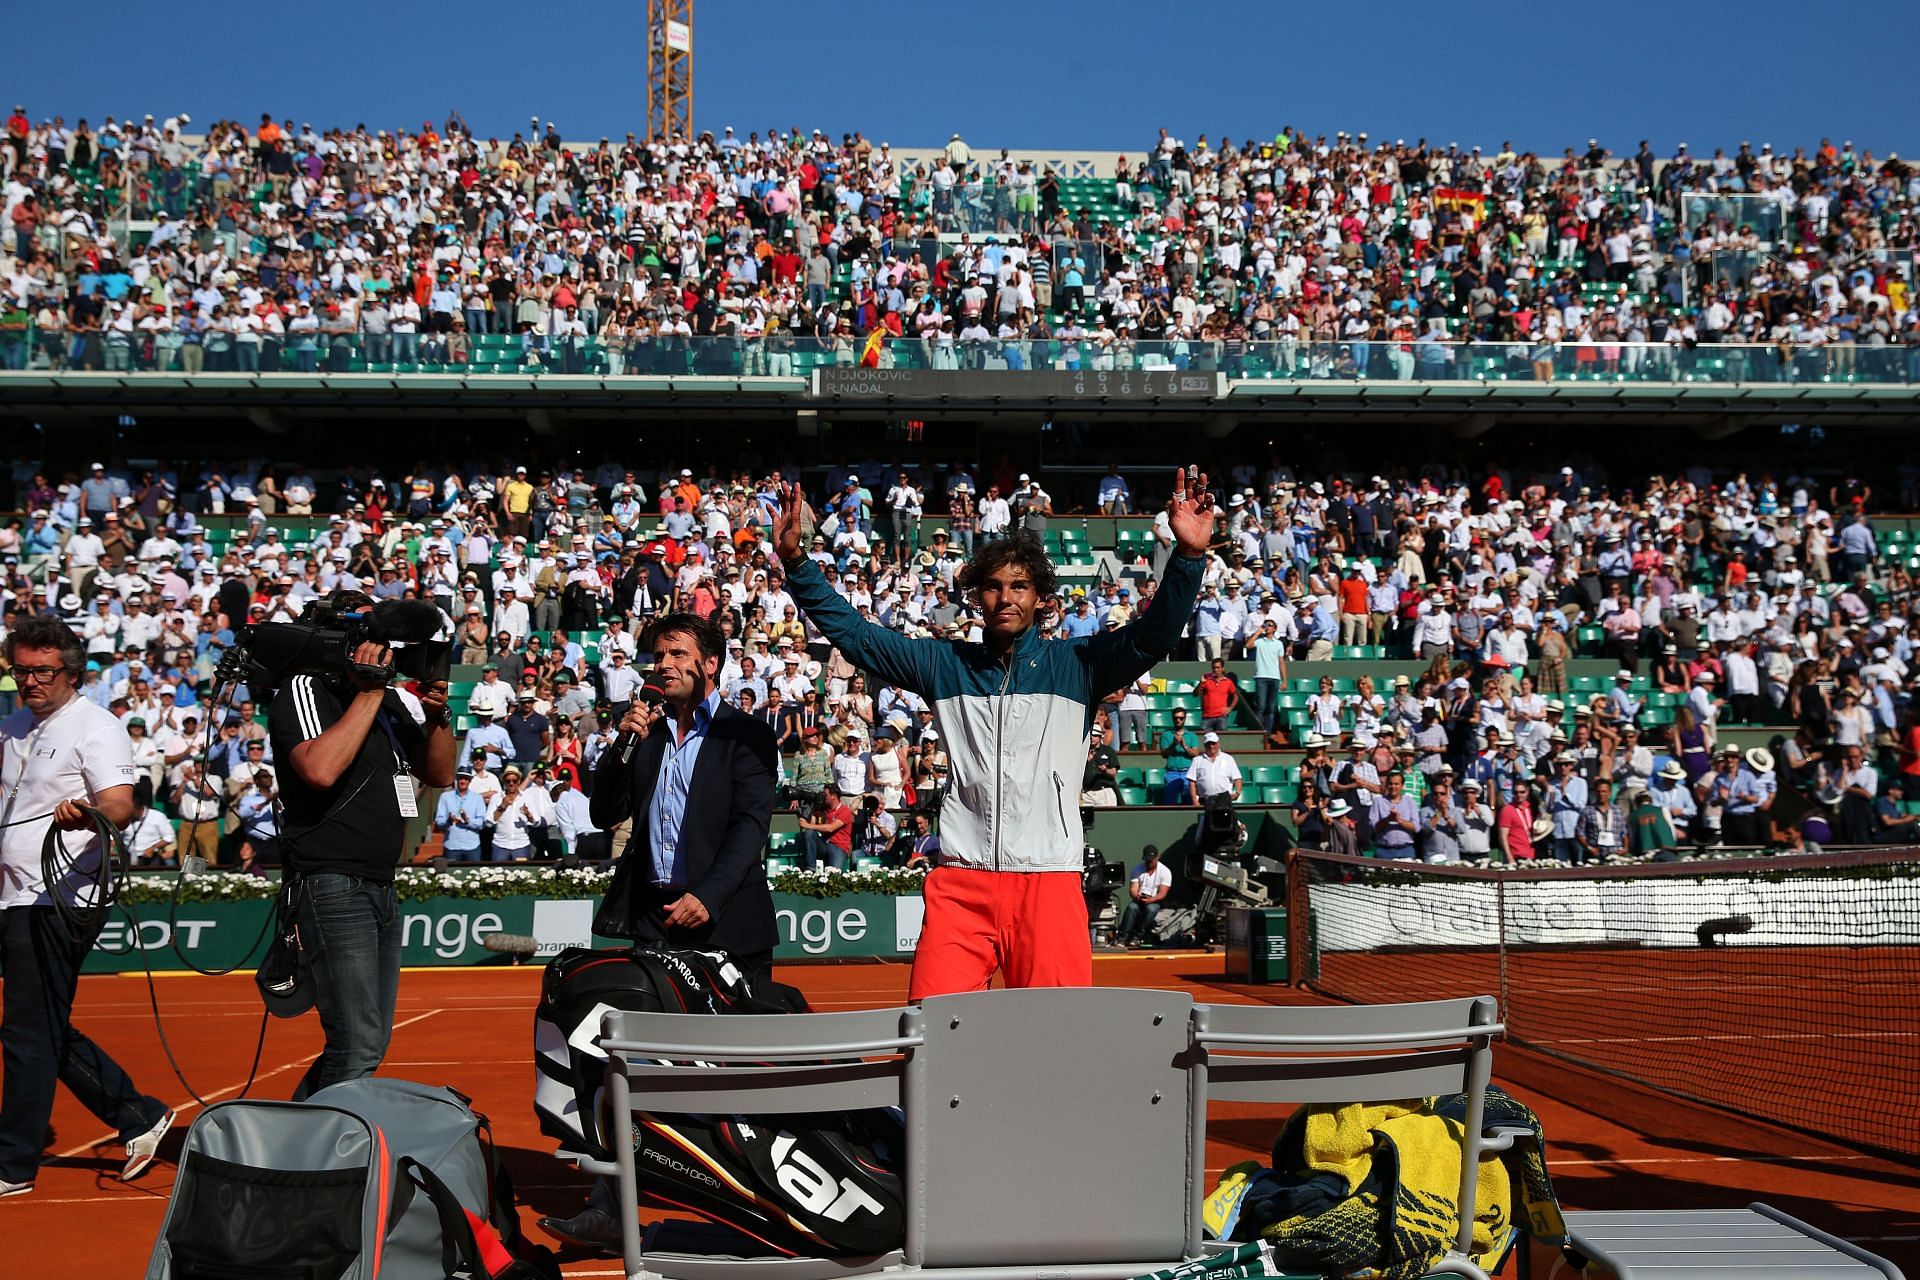 Rafael Nadal at the 2013 French Open - Day 13